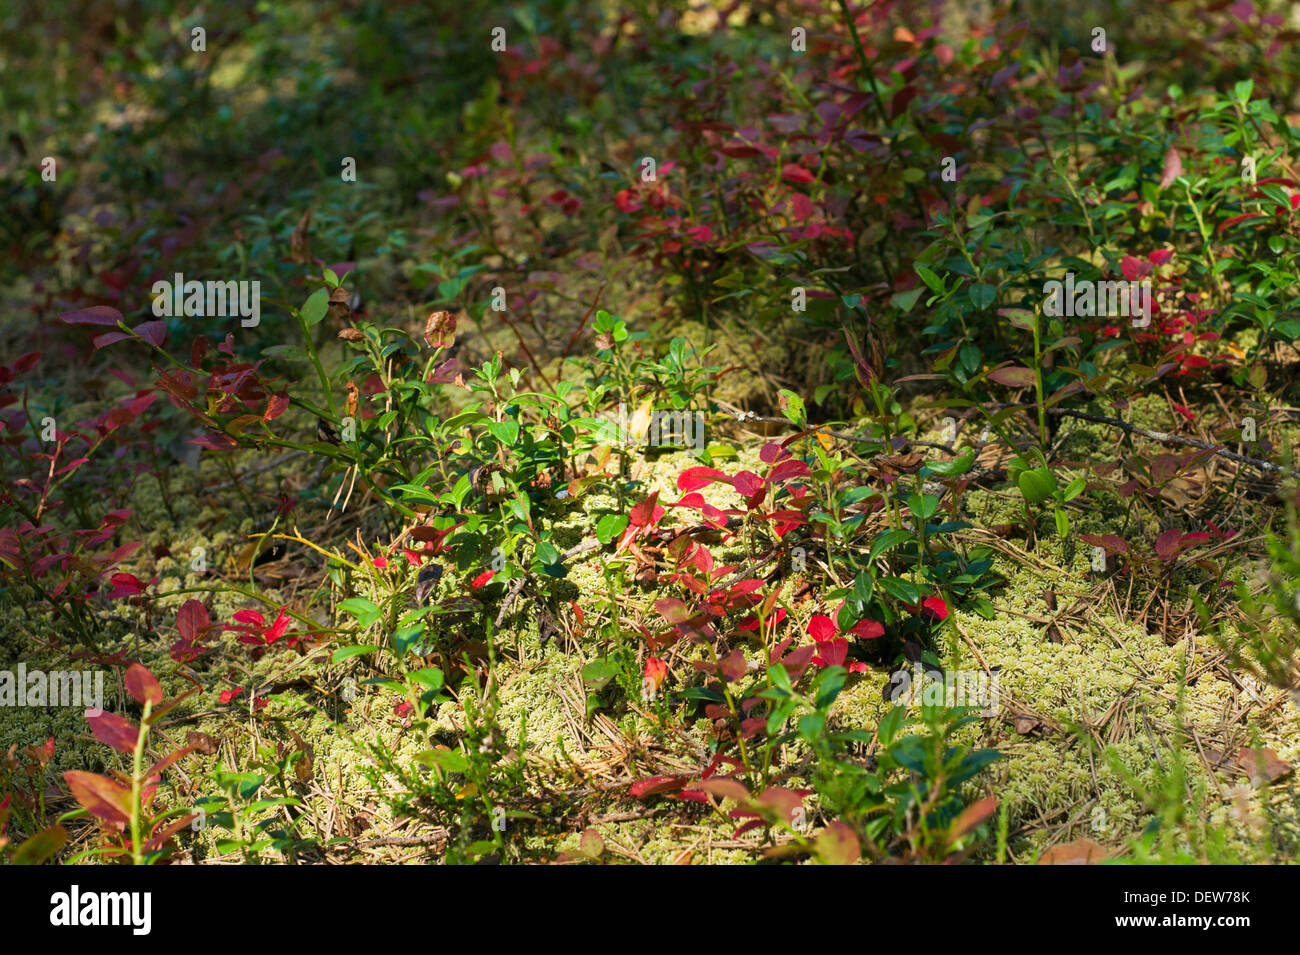 Lingonberry plants with red leaves with reindeer lichen Stock Photo